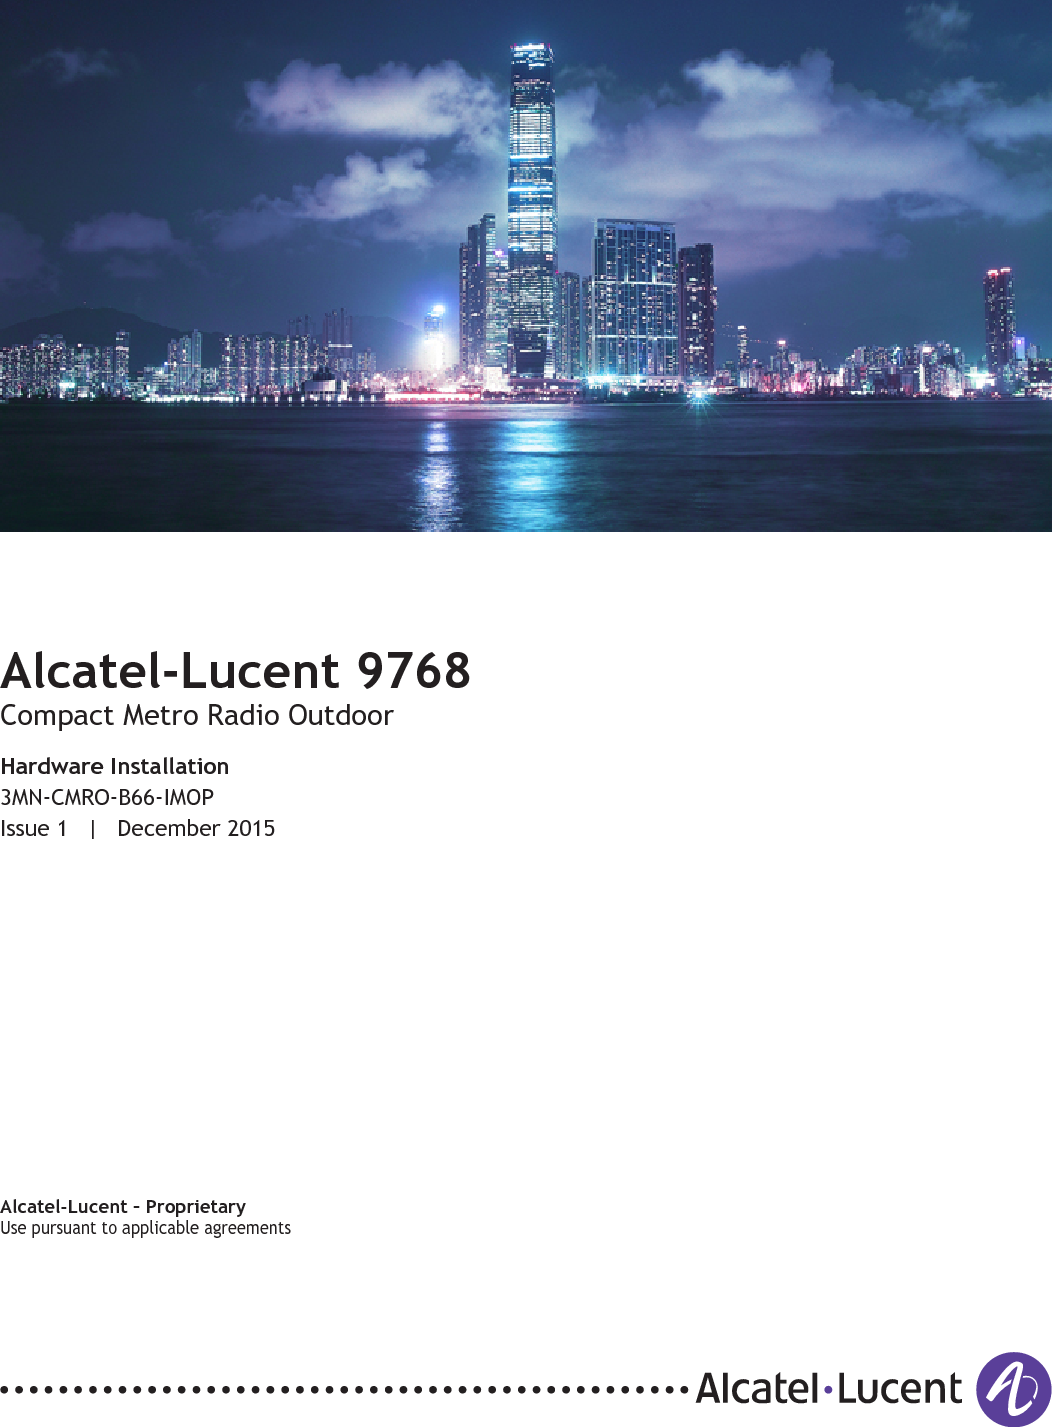 Title pageAlcatel-Lucent 9768Compact Metro Radio OutdoorHardware Installation3MN-CMRO-B66-IMOPIssue 1 | December 2015Alcatel-Lucent – ProprietaryUse pursuant to applicable agreementsUse pursuant to applicable agreementsFCC FILING FCC FILING